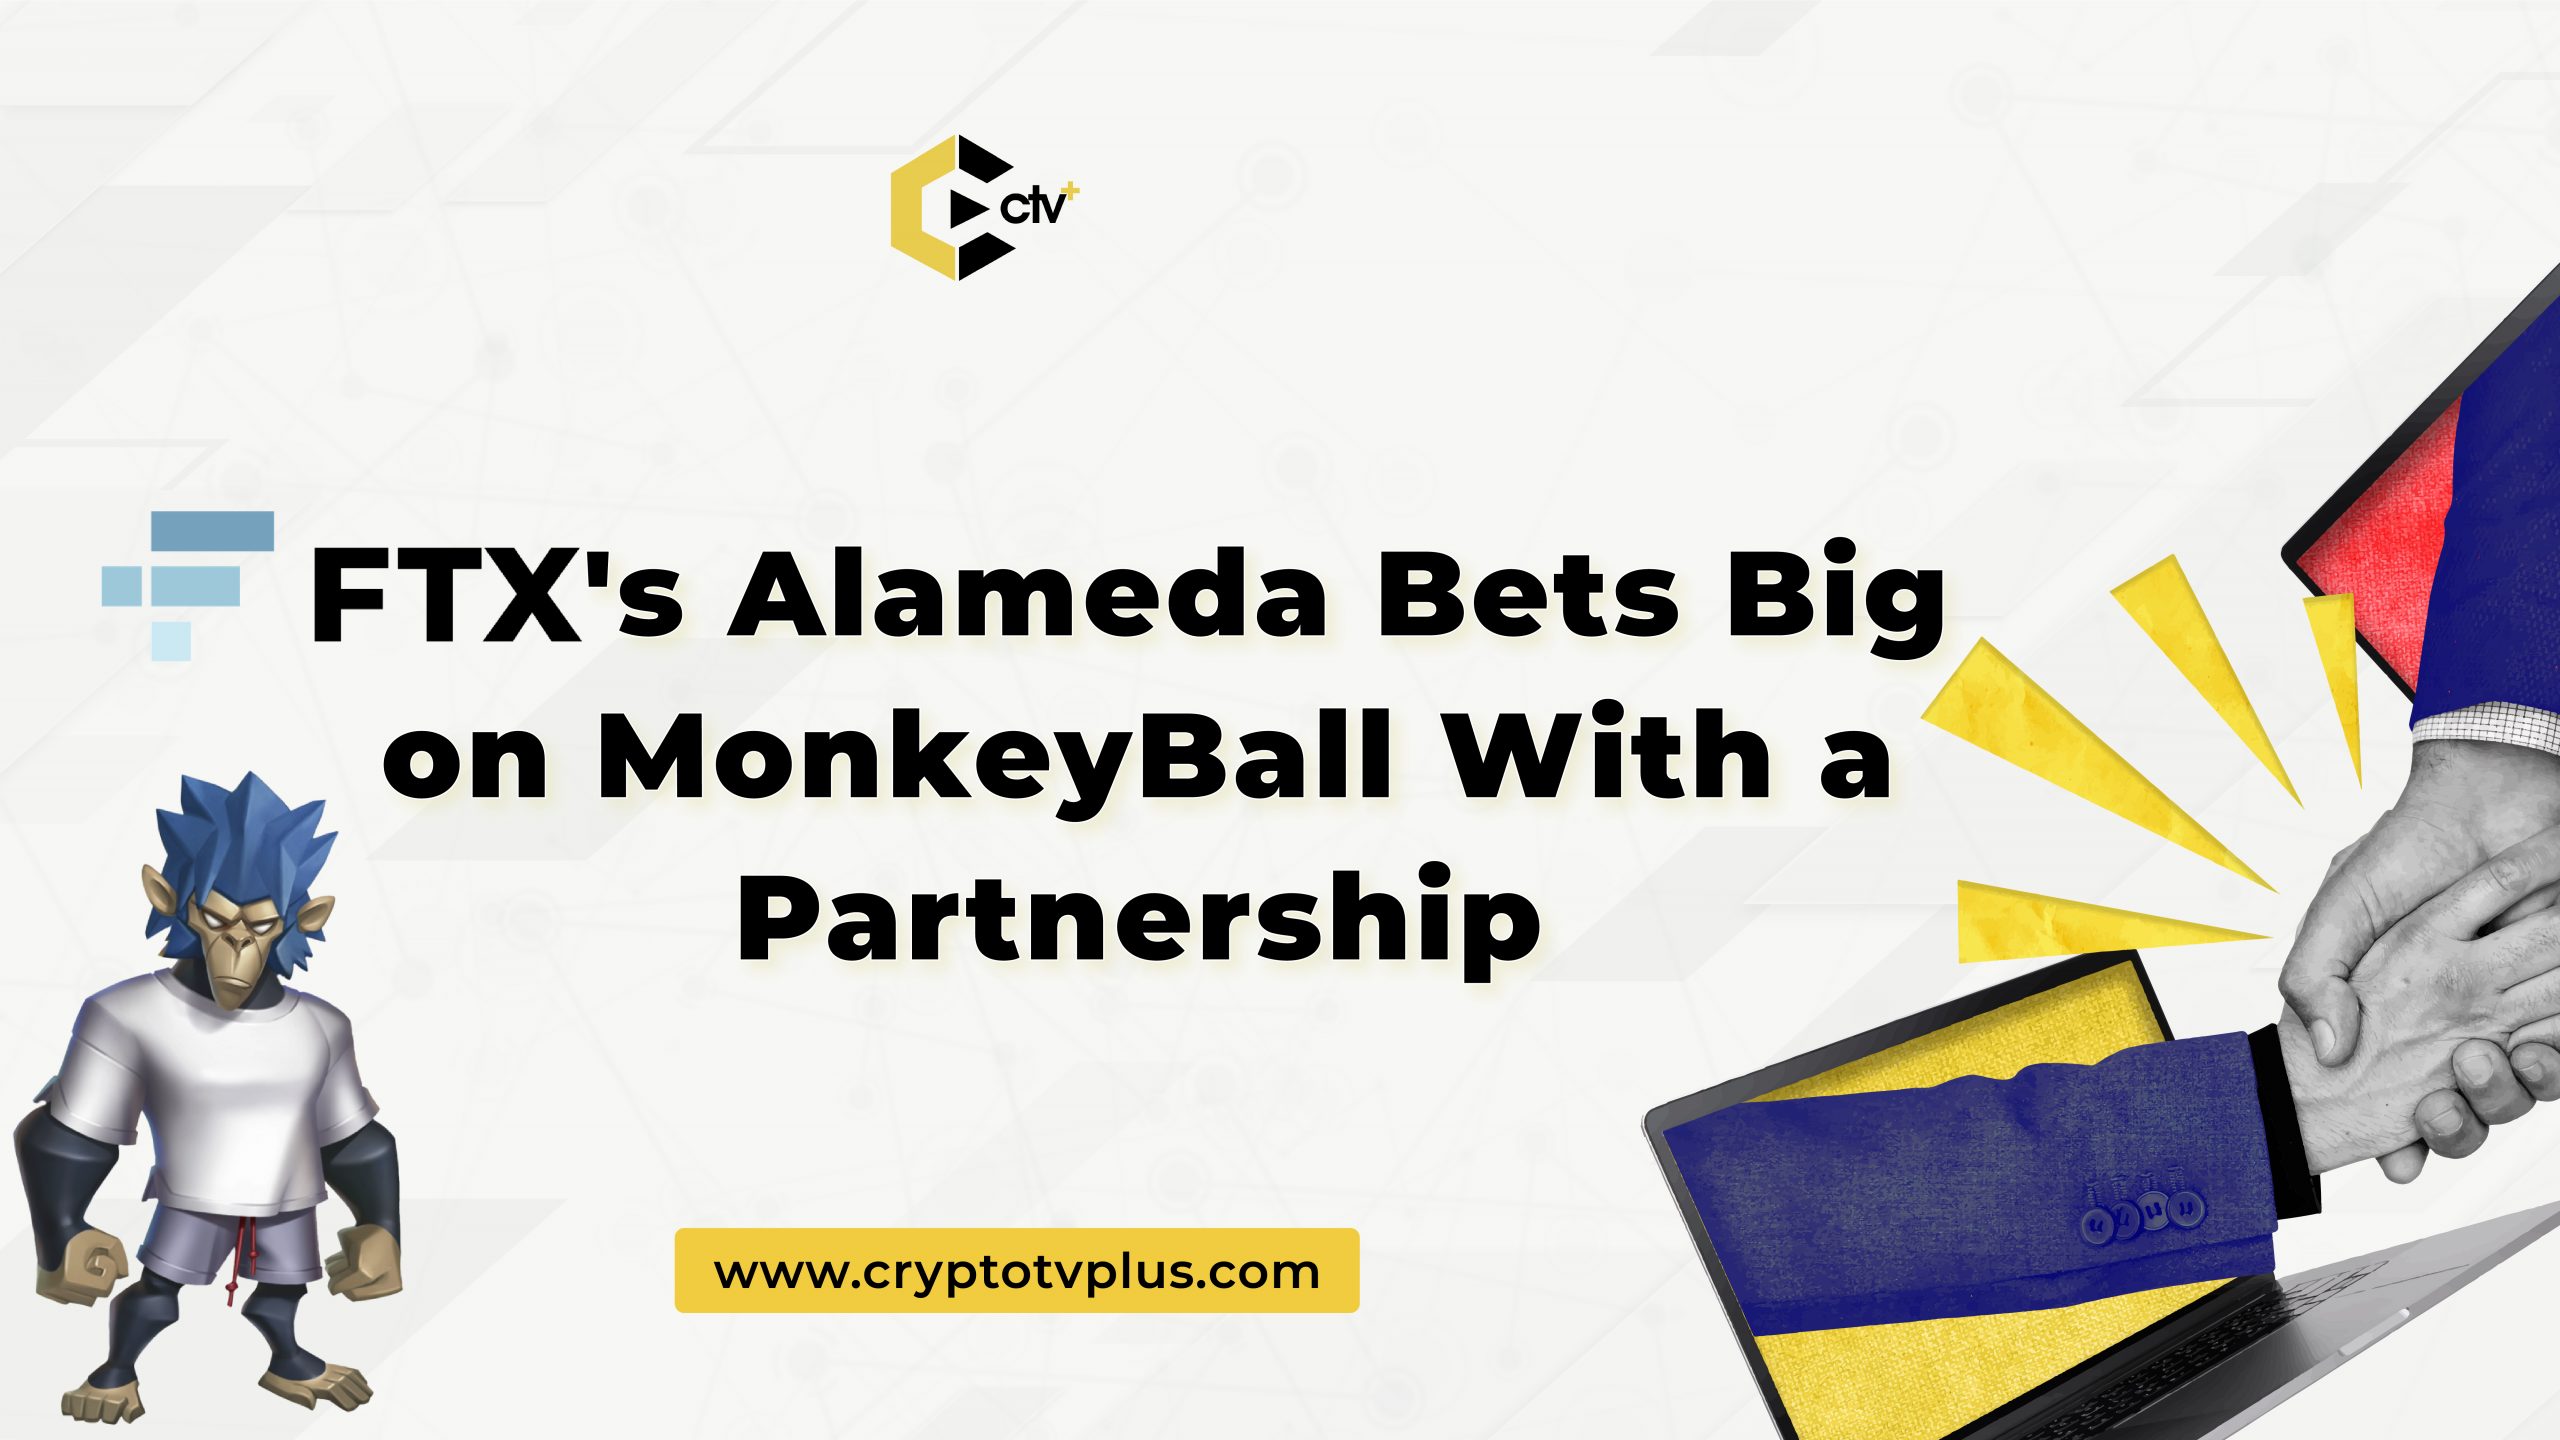 FTX's Alameda Bets Big on MonkeyBall with a Partnership 